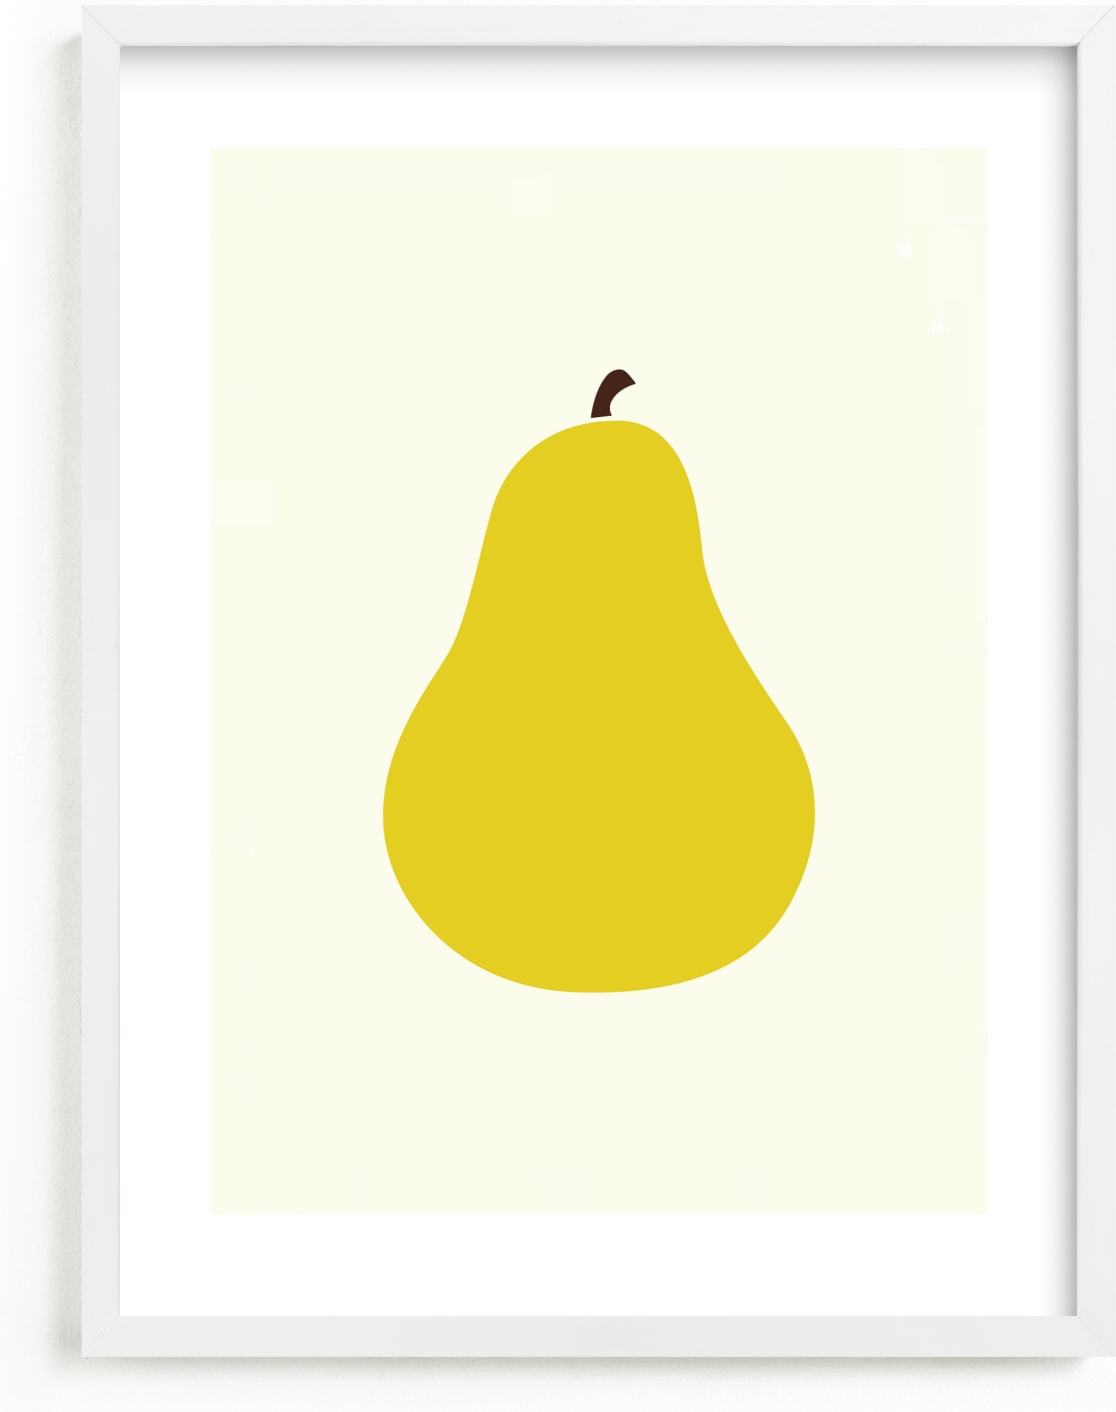 This is a yellow nursery wall art by Alexandra Stafford called Heirloom Pear.